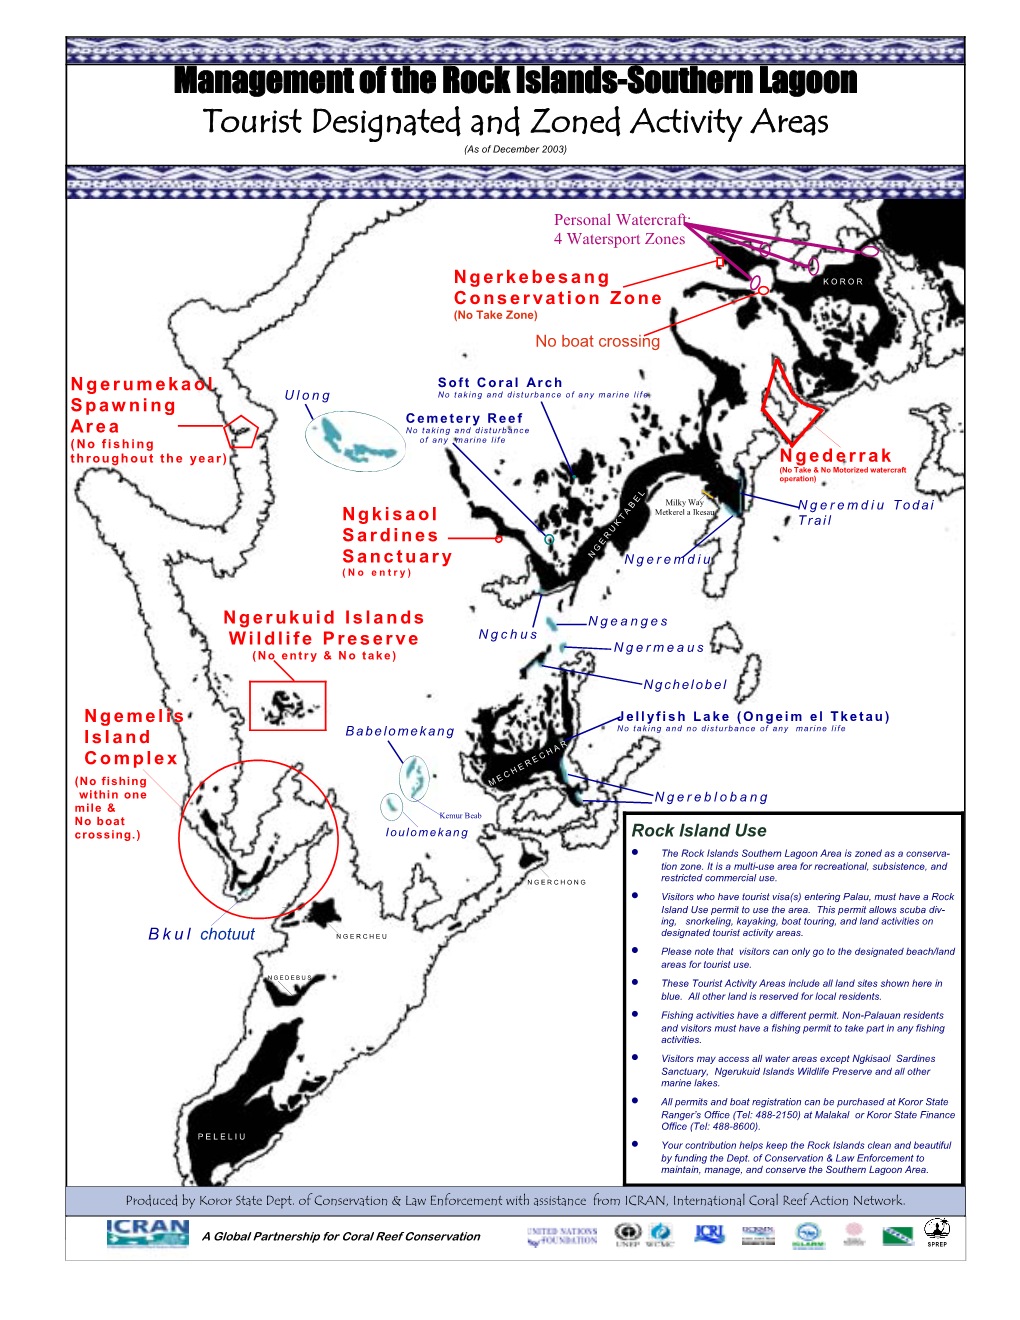 Management of the Rock Islands-Southern Lagoon Tourist Designated and Zoned Activity Areas (As of December 2003)